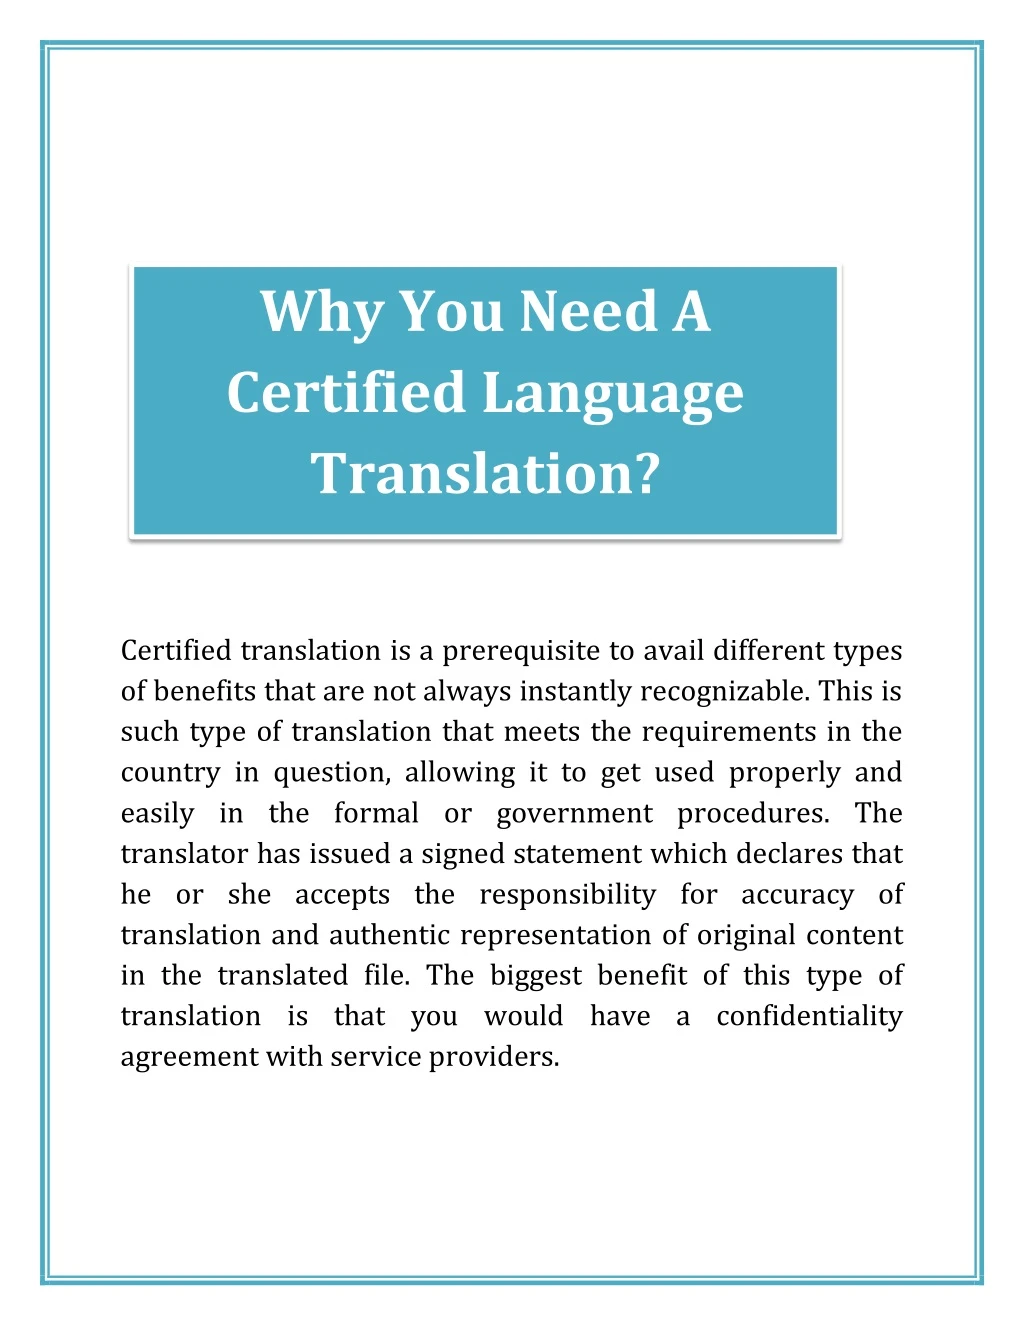 why you need a certified language translation